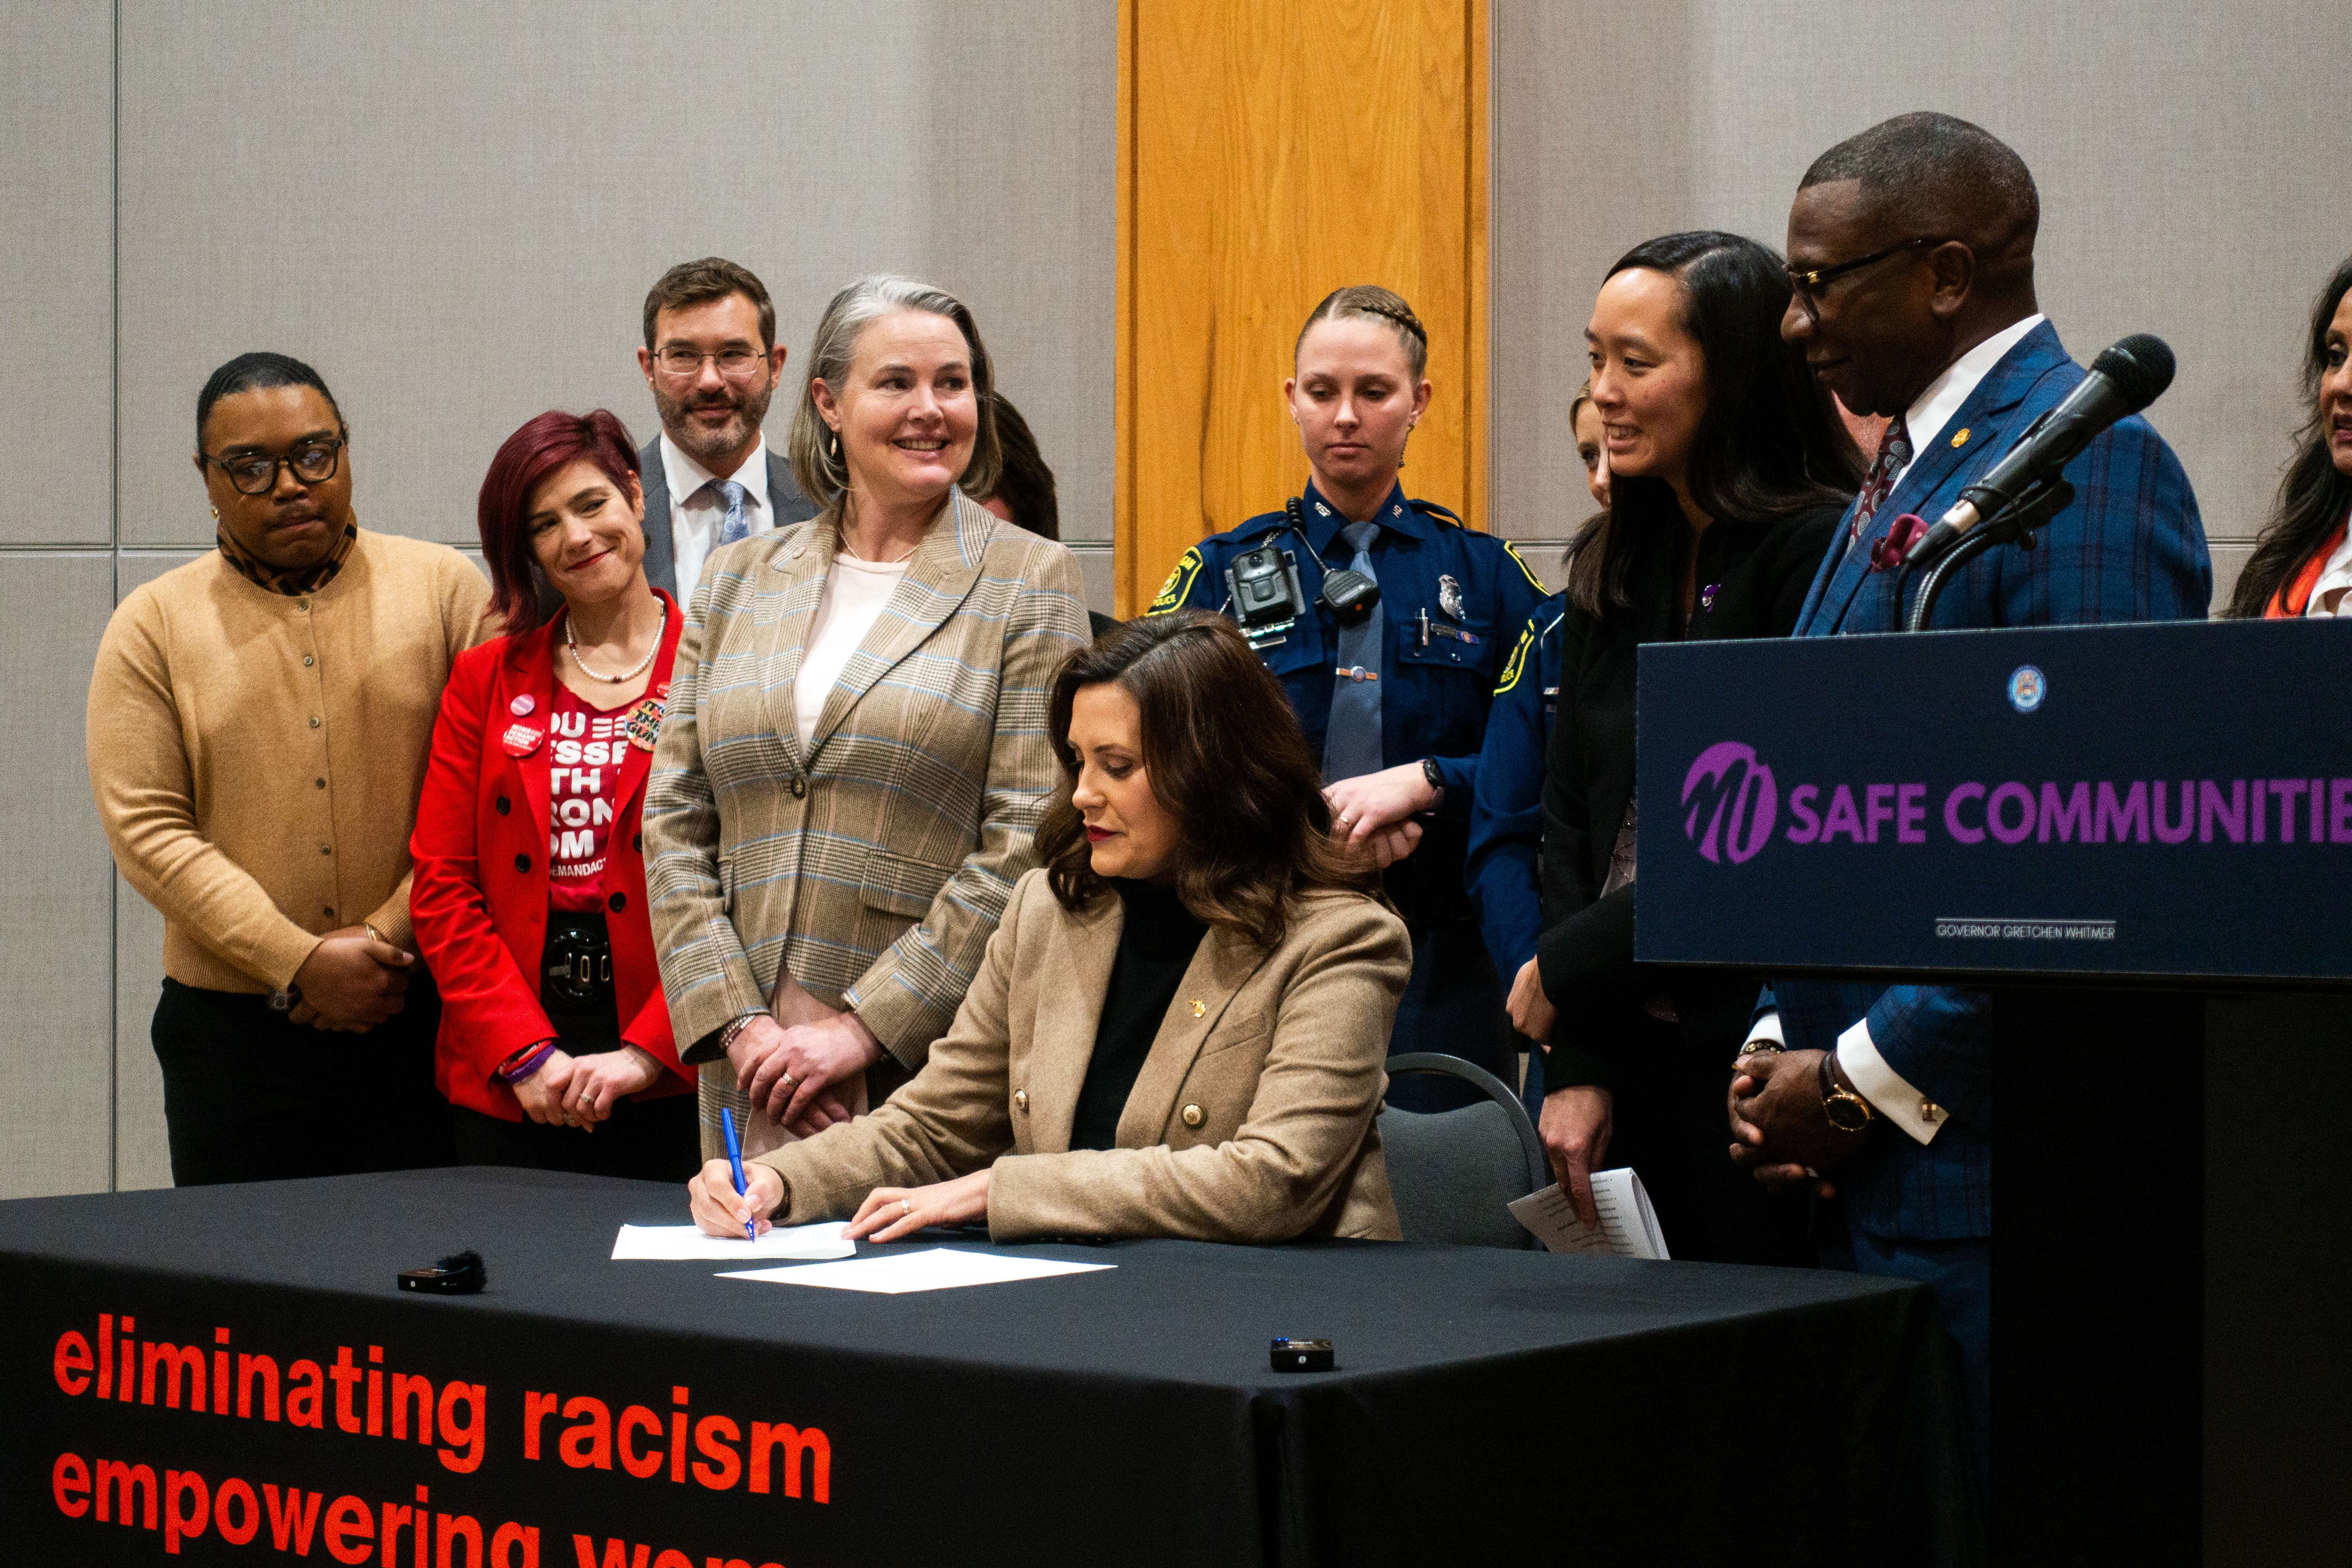 Gov. Gretchen Whitmer signs bills preventing those convicted of misdemeanor domestic violence offenses from owning firearms for 8 years.